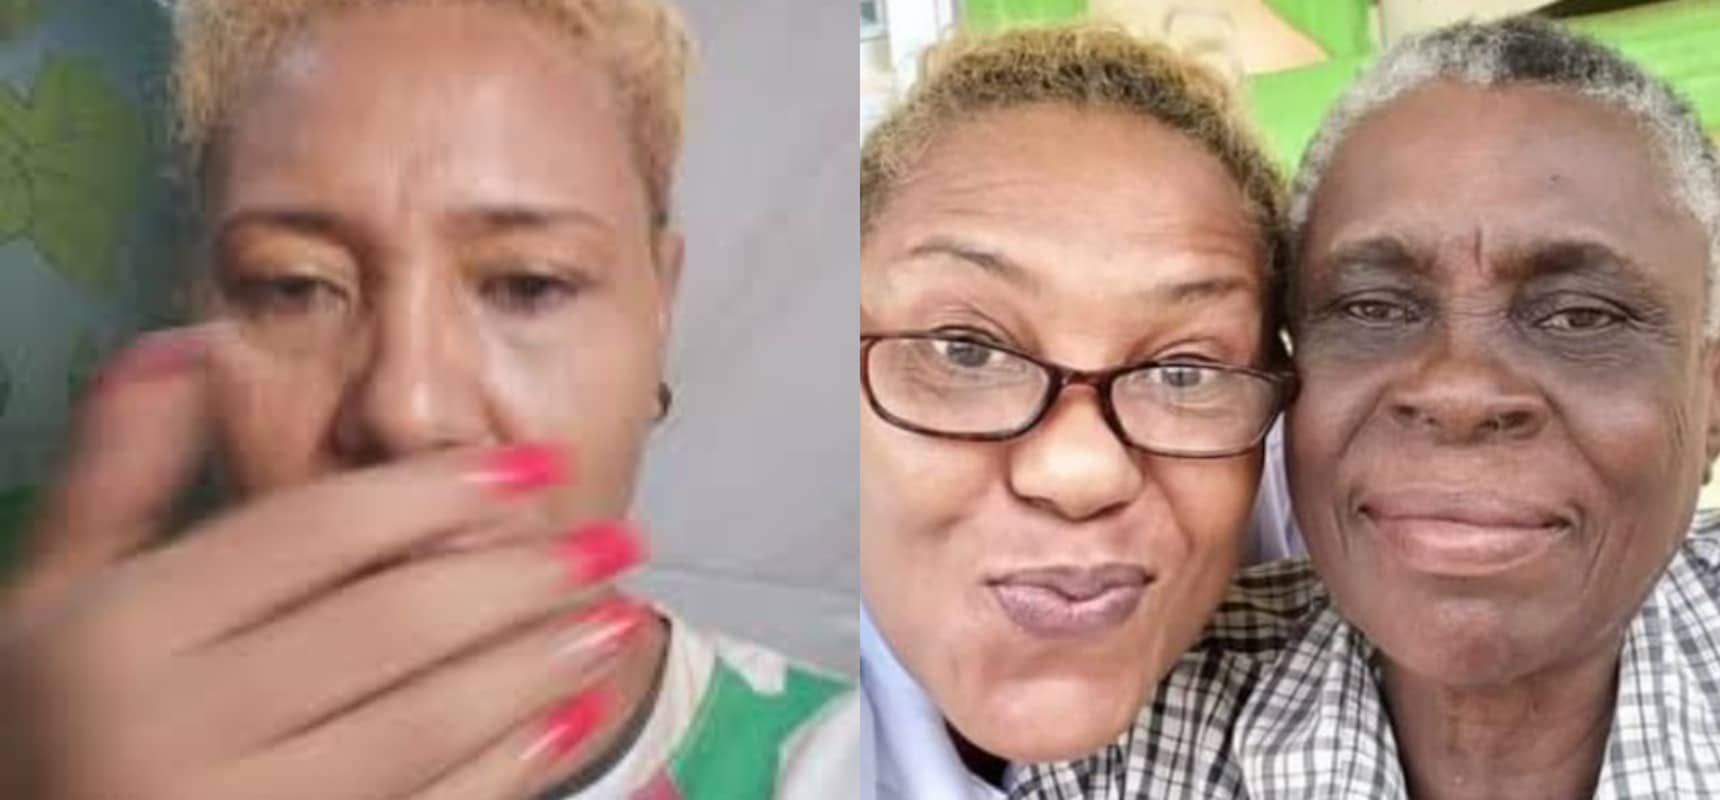 You’re wearing Biafran flag – Actress, Shan George reacts as Chiwetalu Agu denies supporting secessionists